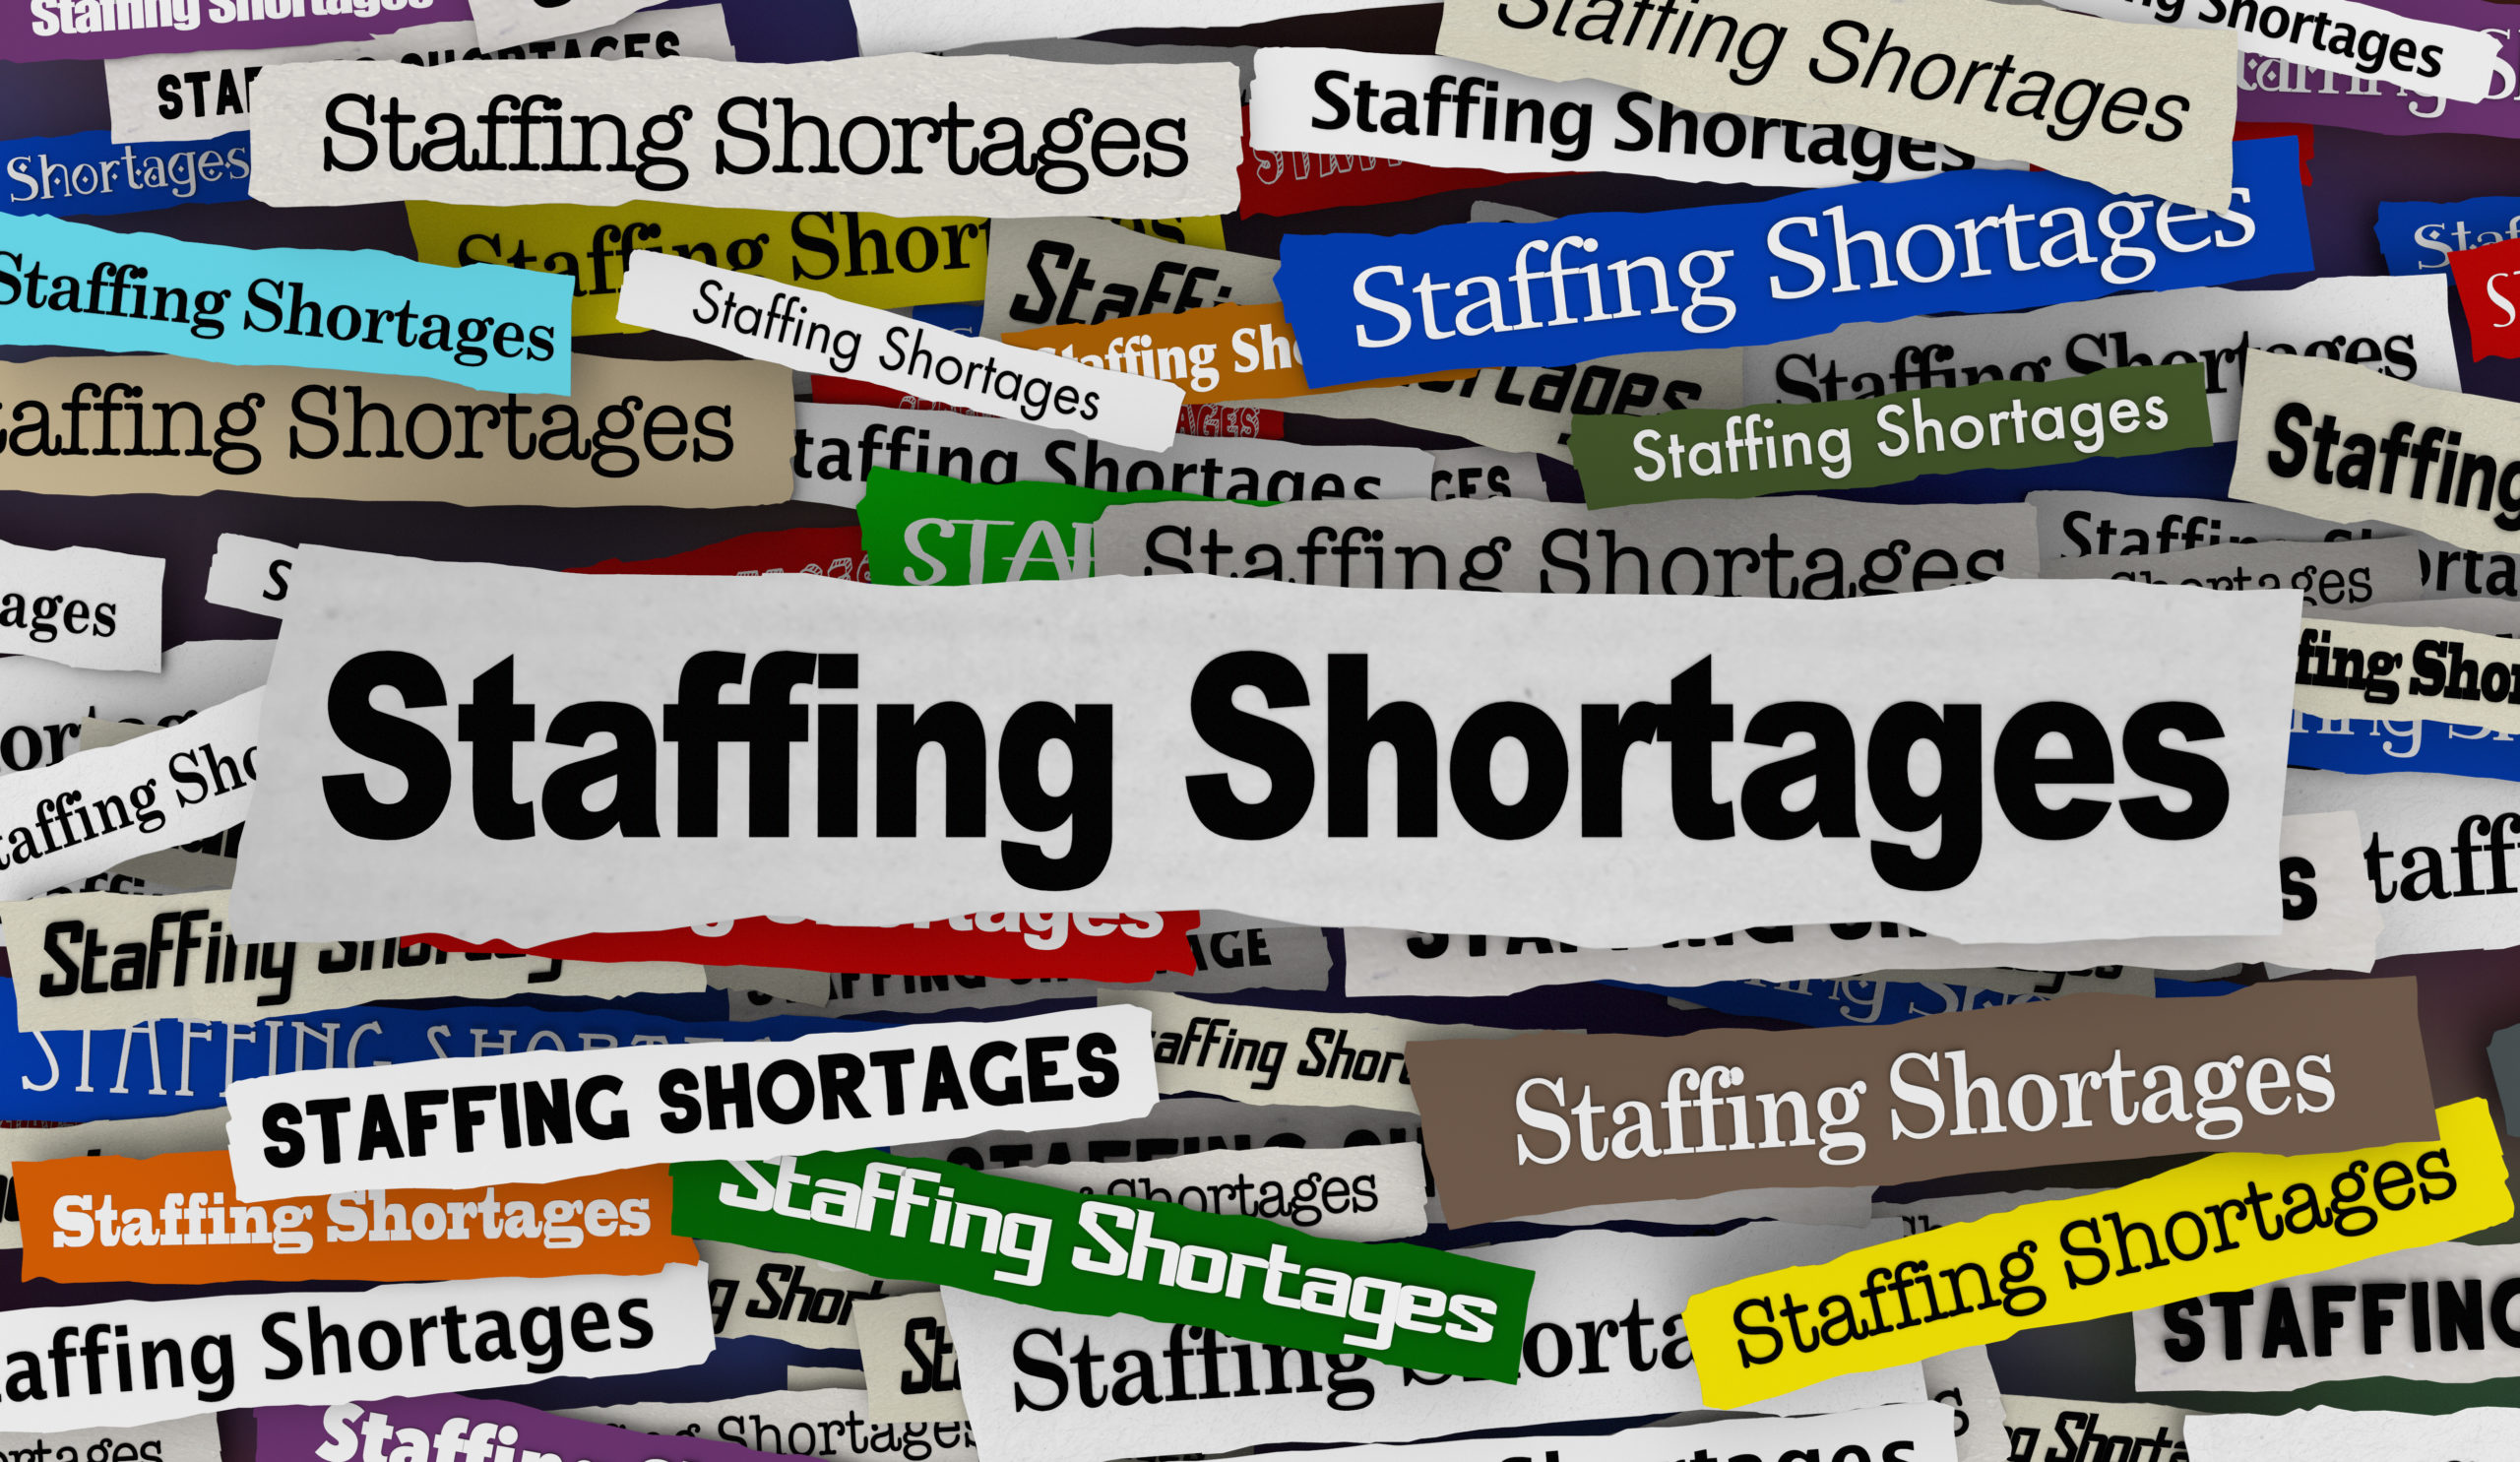 Cross-Training Healthcare Clinicians and Technicians Can Help Alleviate Staffing Shortages